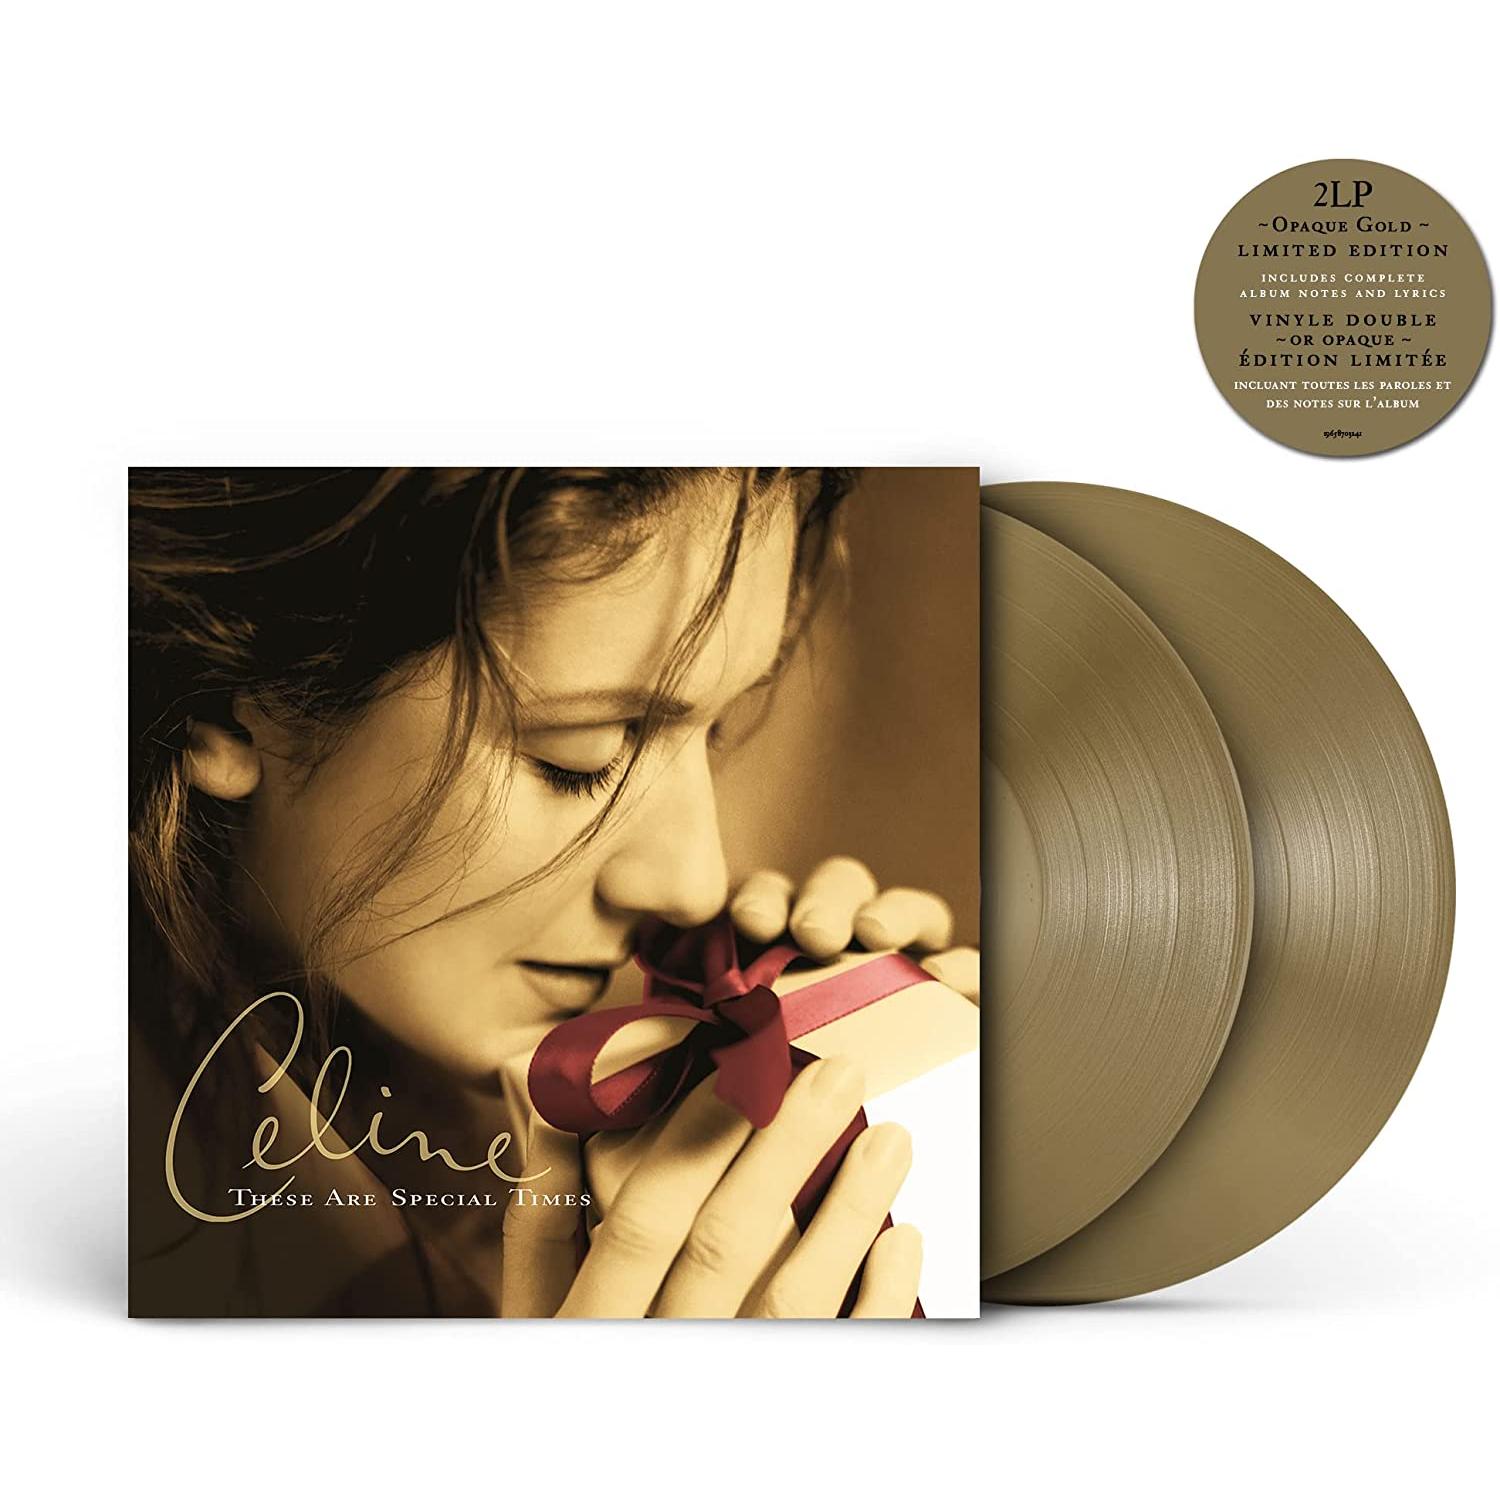 Celine Dion - These Are Special Times - Foto 1 di 1